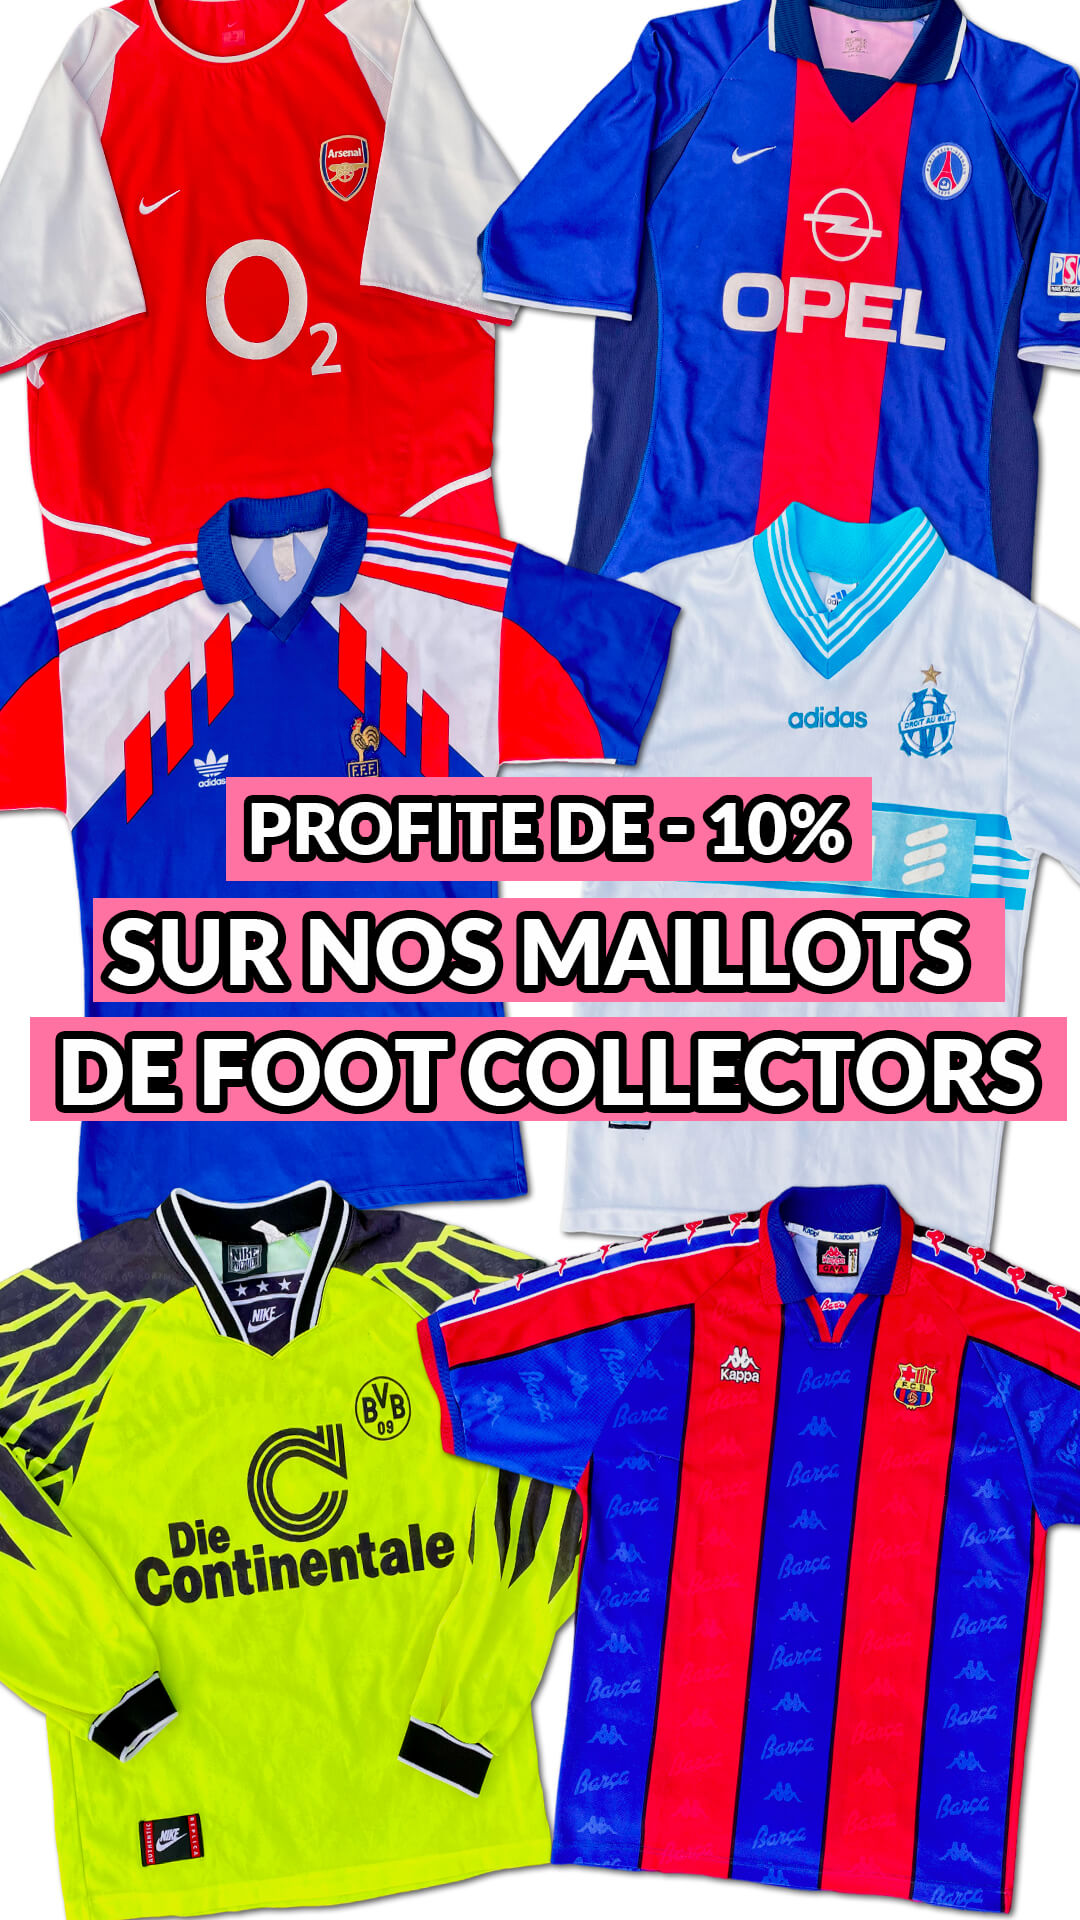 Back To The Football, ton marchand de maillots de foot vintage